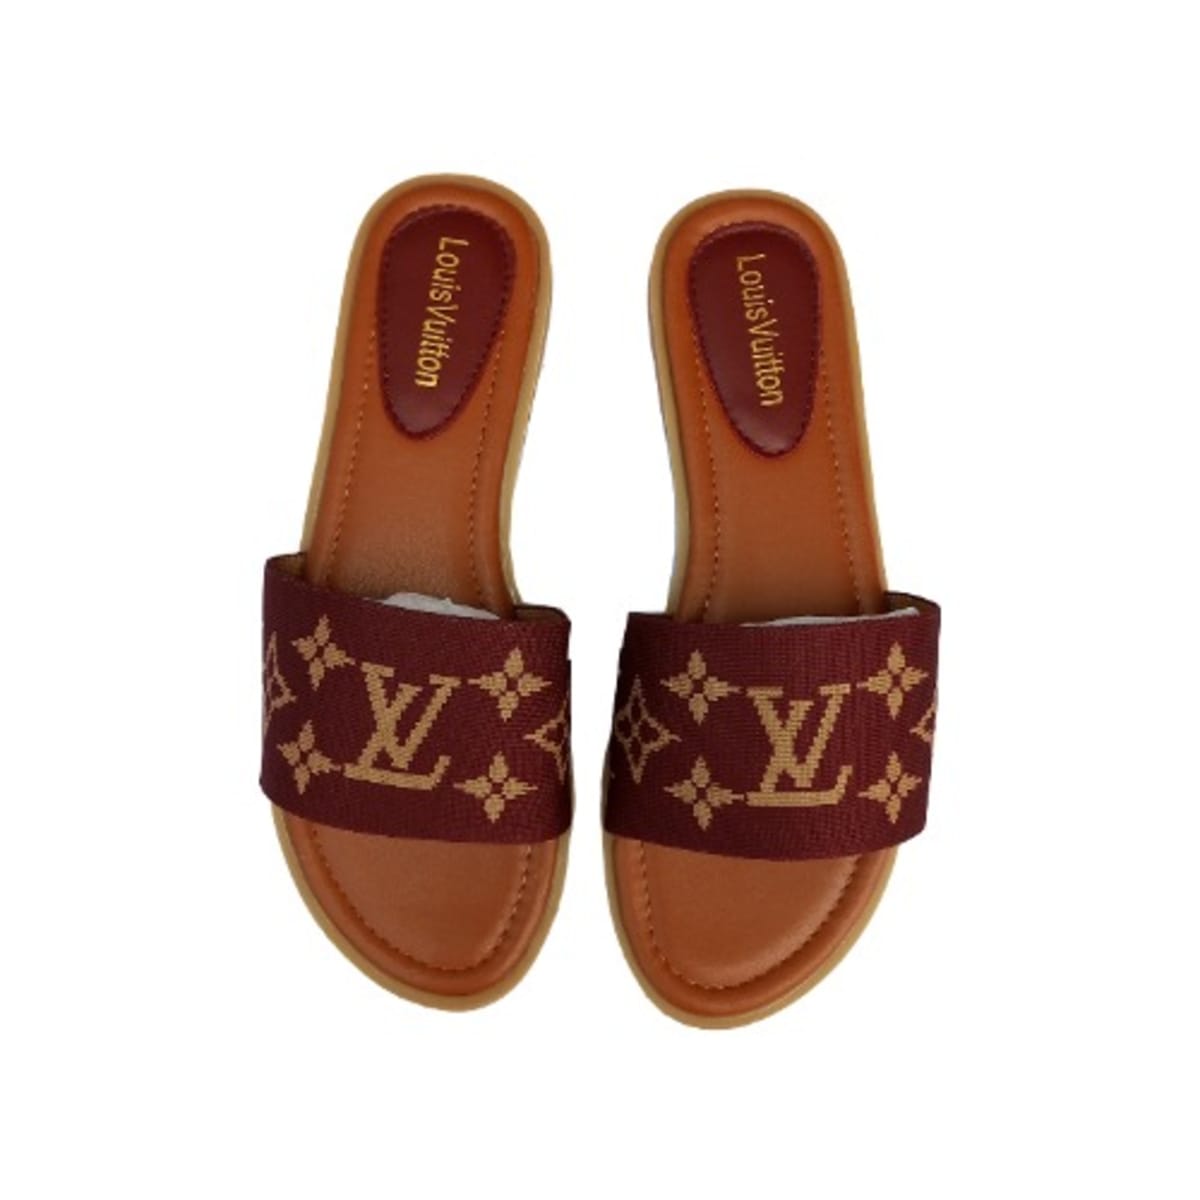 Louis Vuitton Slides Size Chart and Fitting 